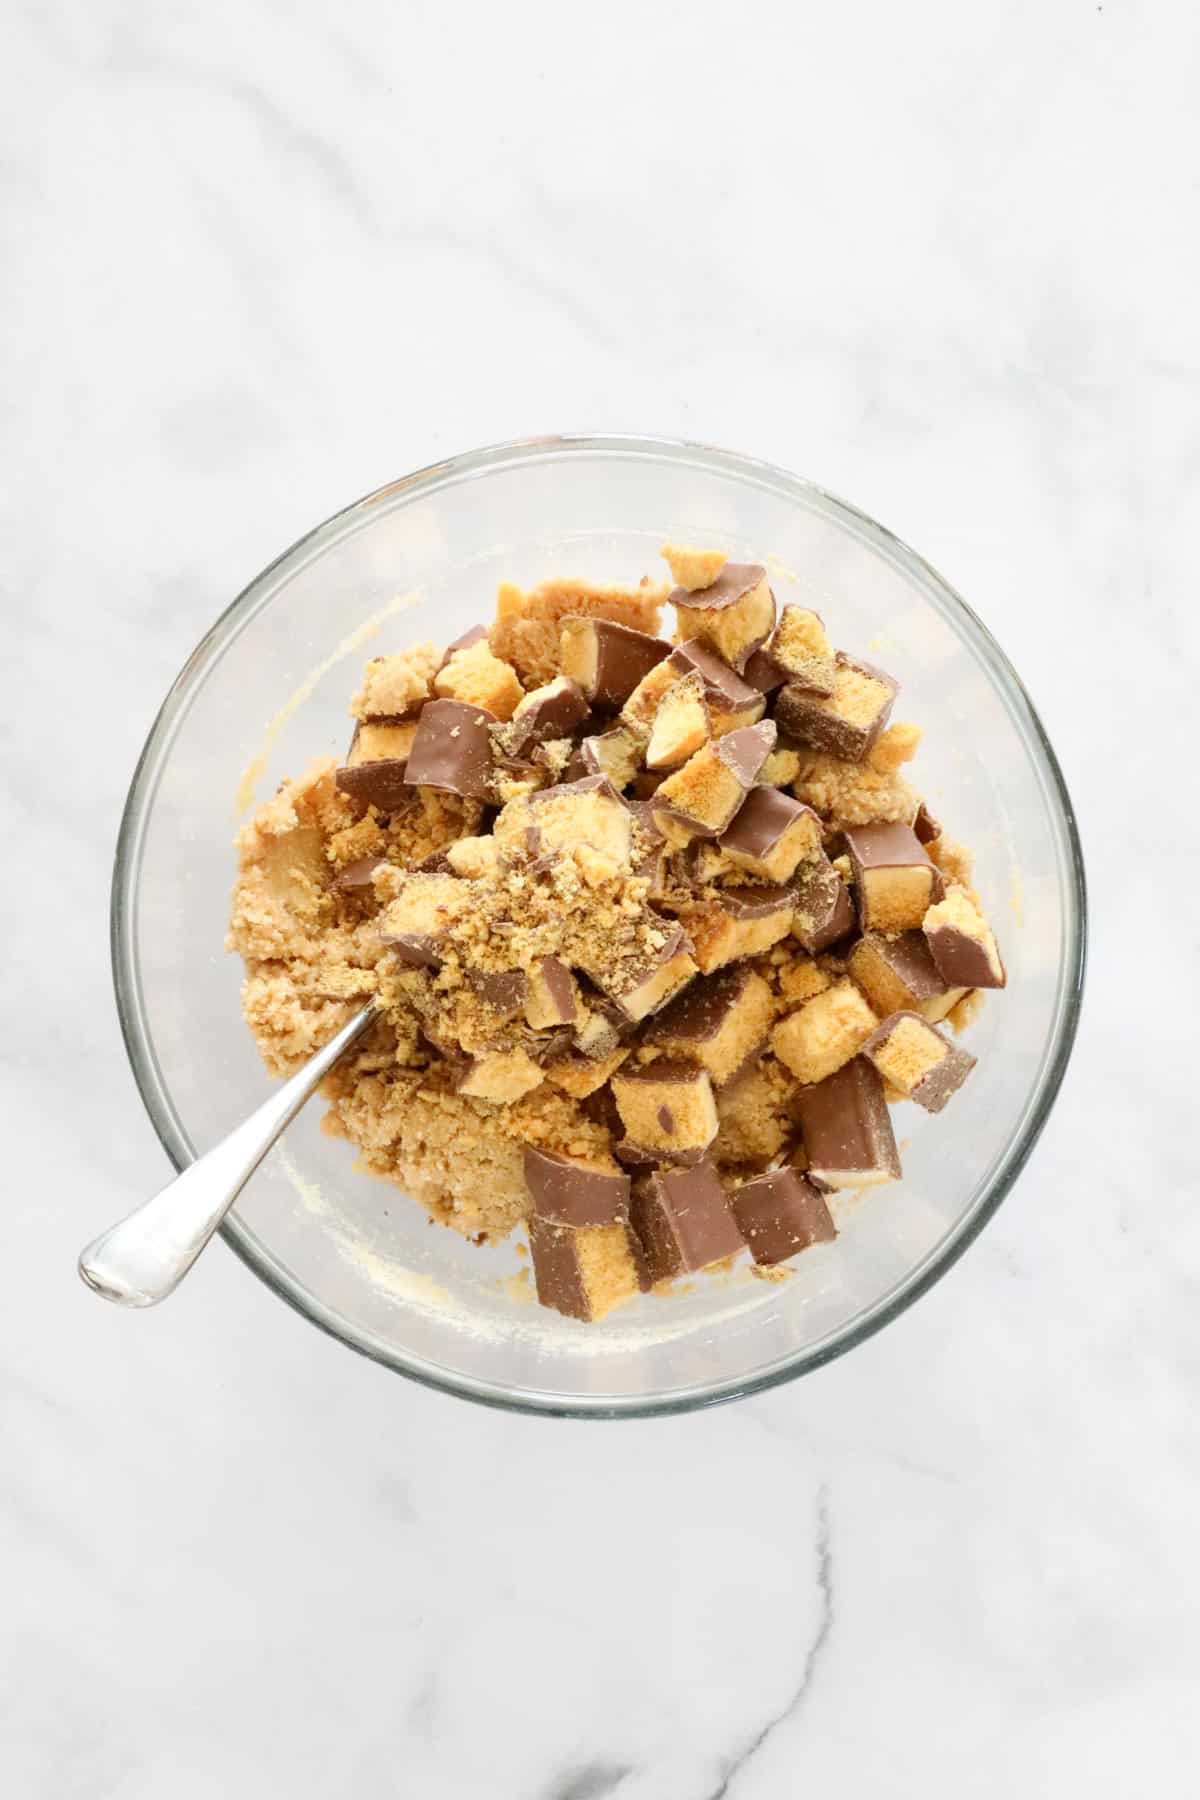 Chunks of Crunchie bar added to crushed biscuit mix.